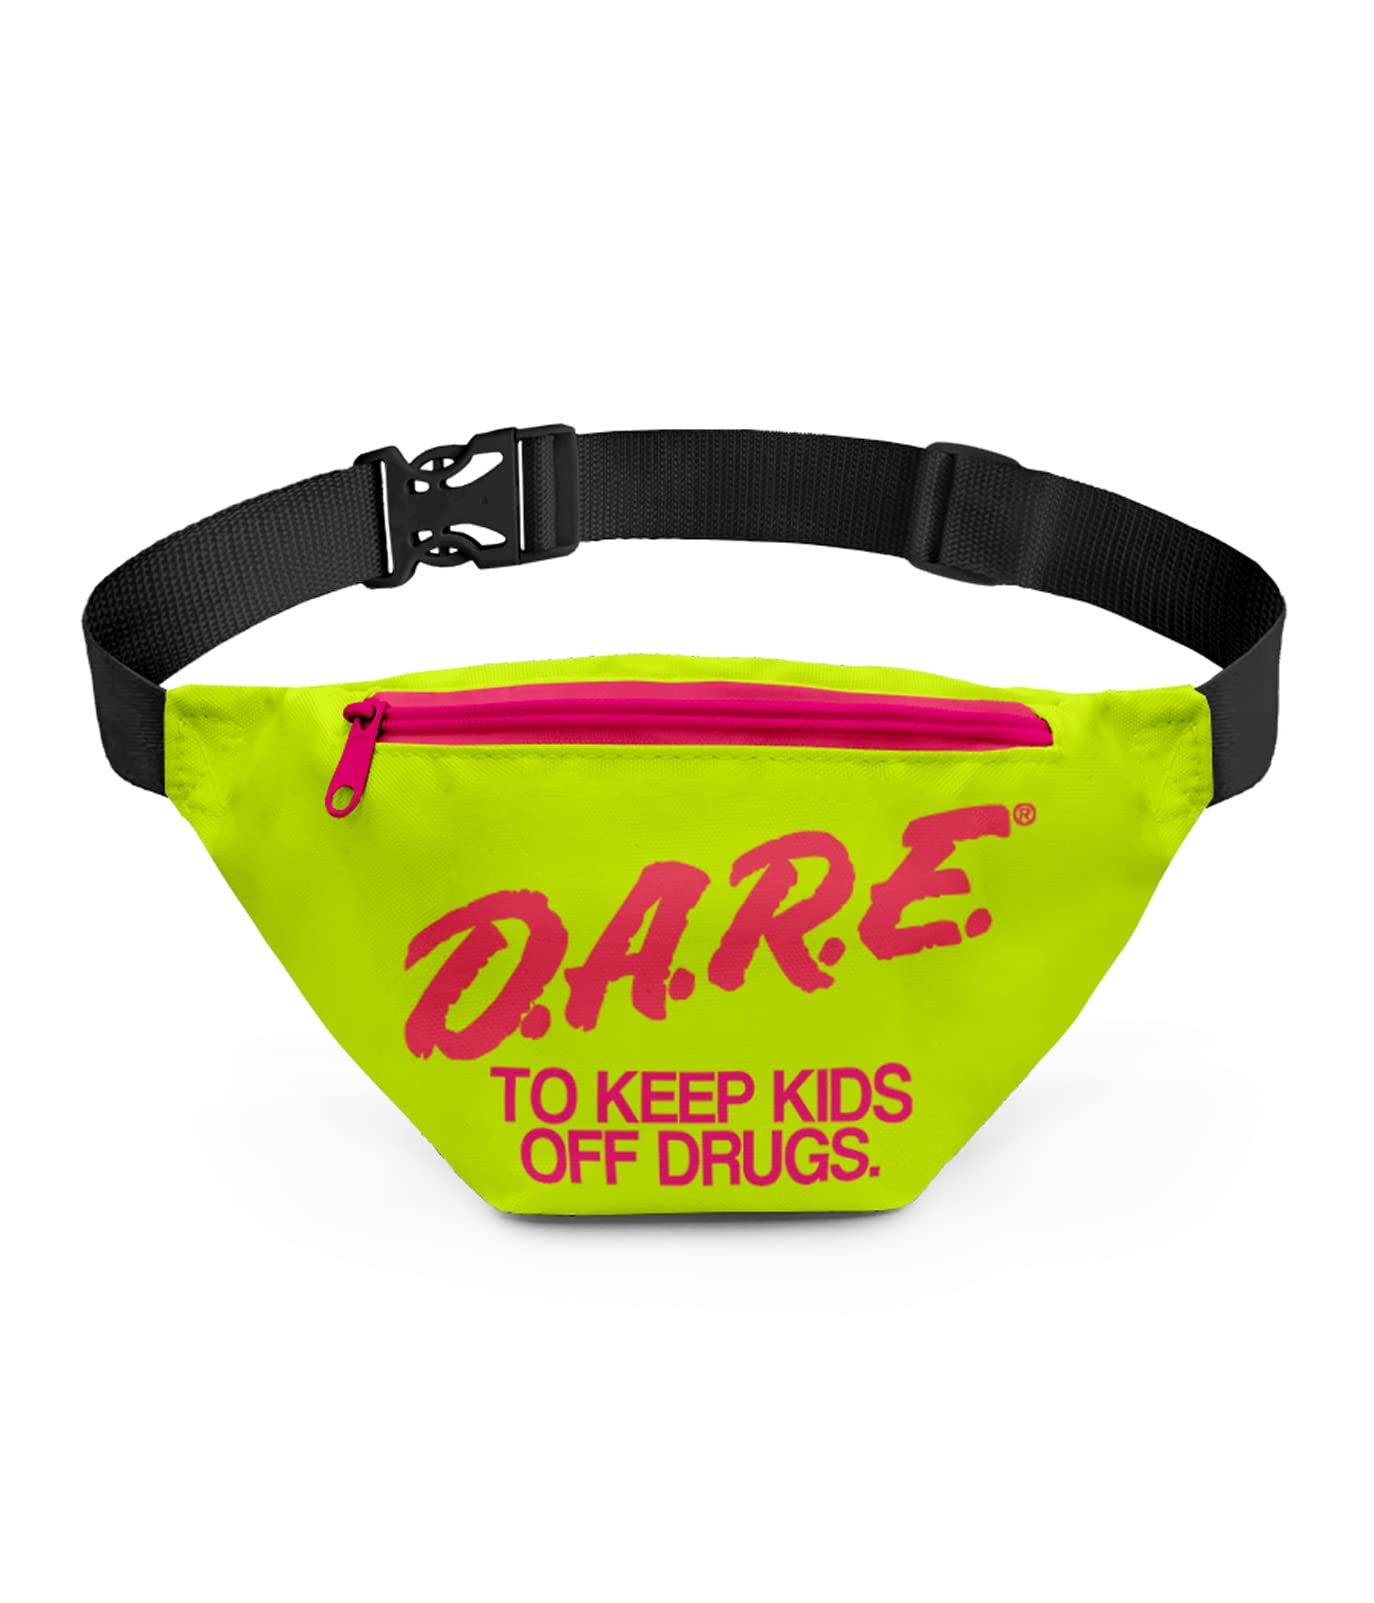 Tipsy Elves DARE Fanny Pack with Adjustable Belt and 3 Zippered Pockets - Neon Fanny Pack - Includes Discreet Hidden Zipper Pocket for Storing Valuables (Neon Green)